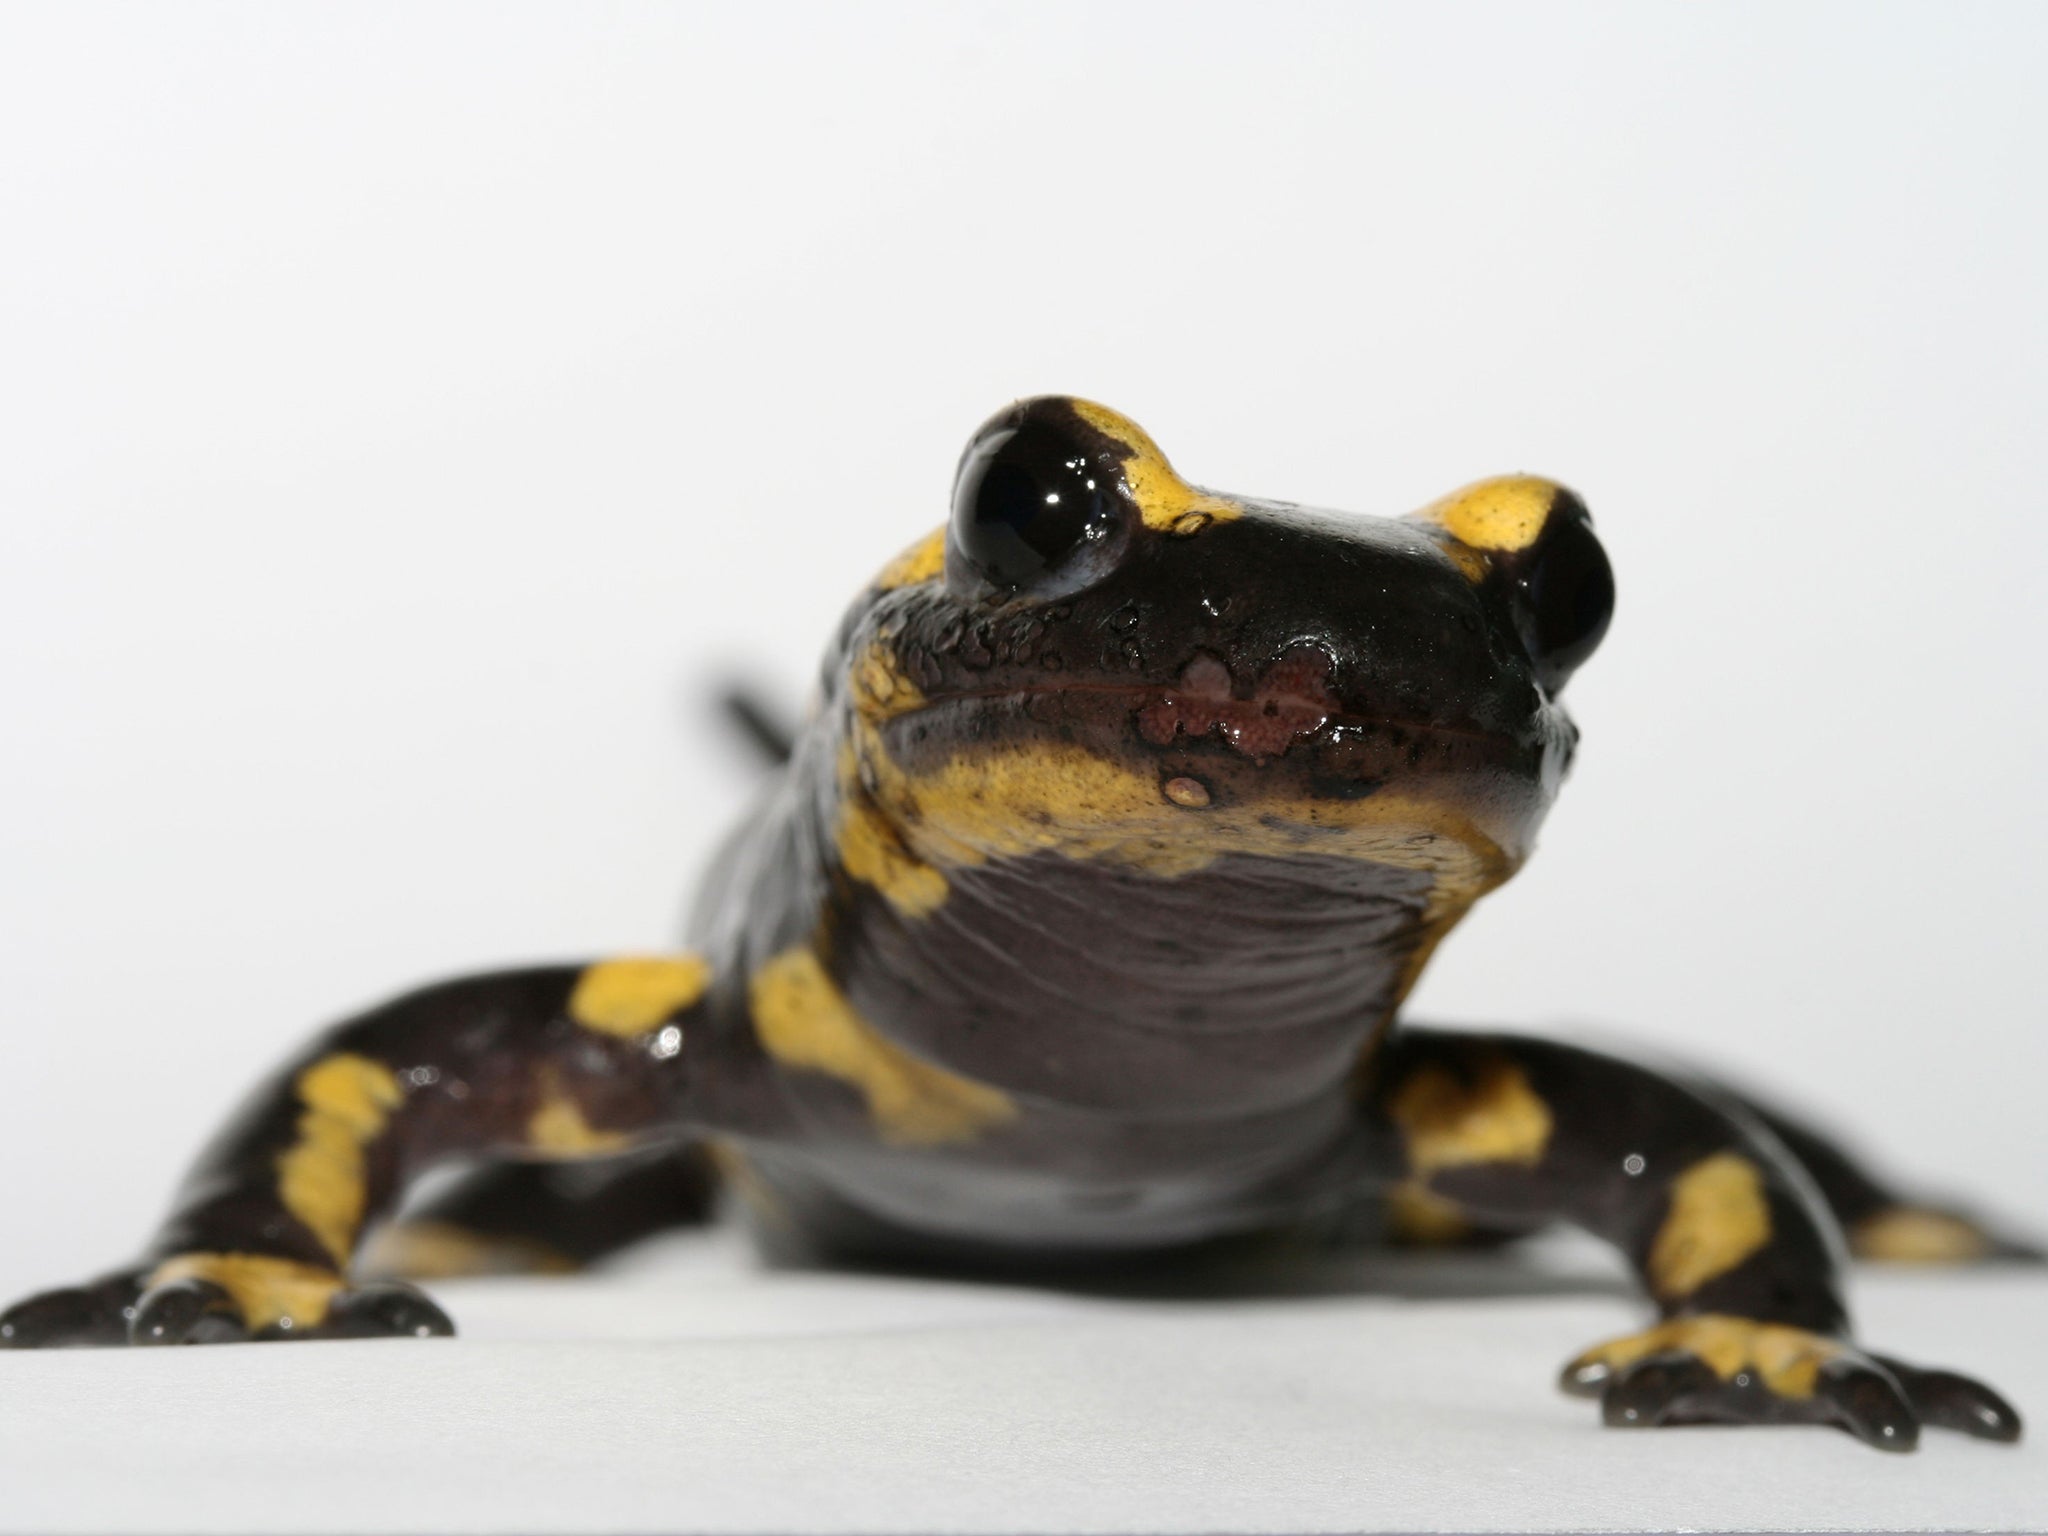 A fire salamander infected by the fungal disease Batrachochytrium salamandrivorans, which experts believe has been exported from Asia to Europe by the pet trade